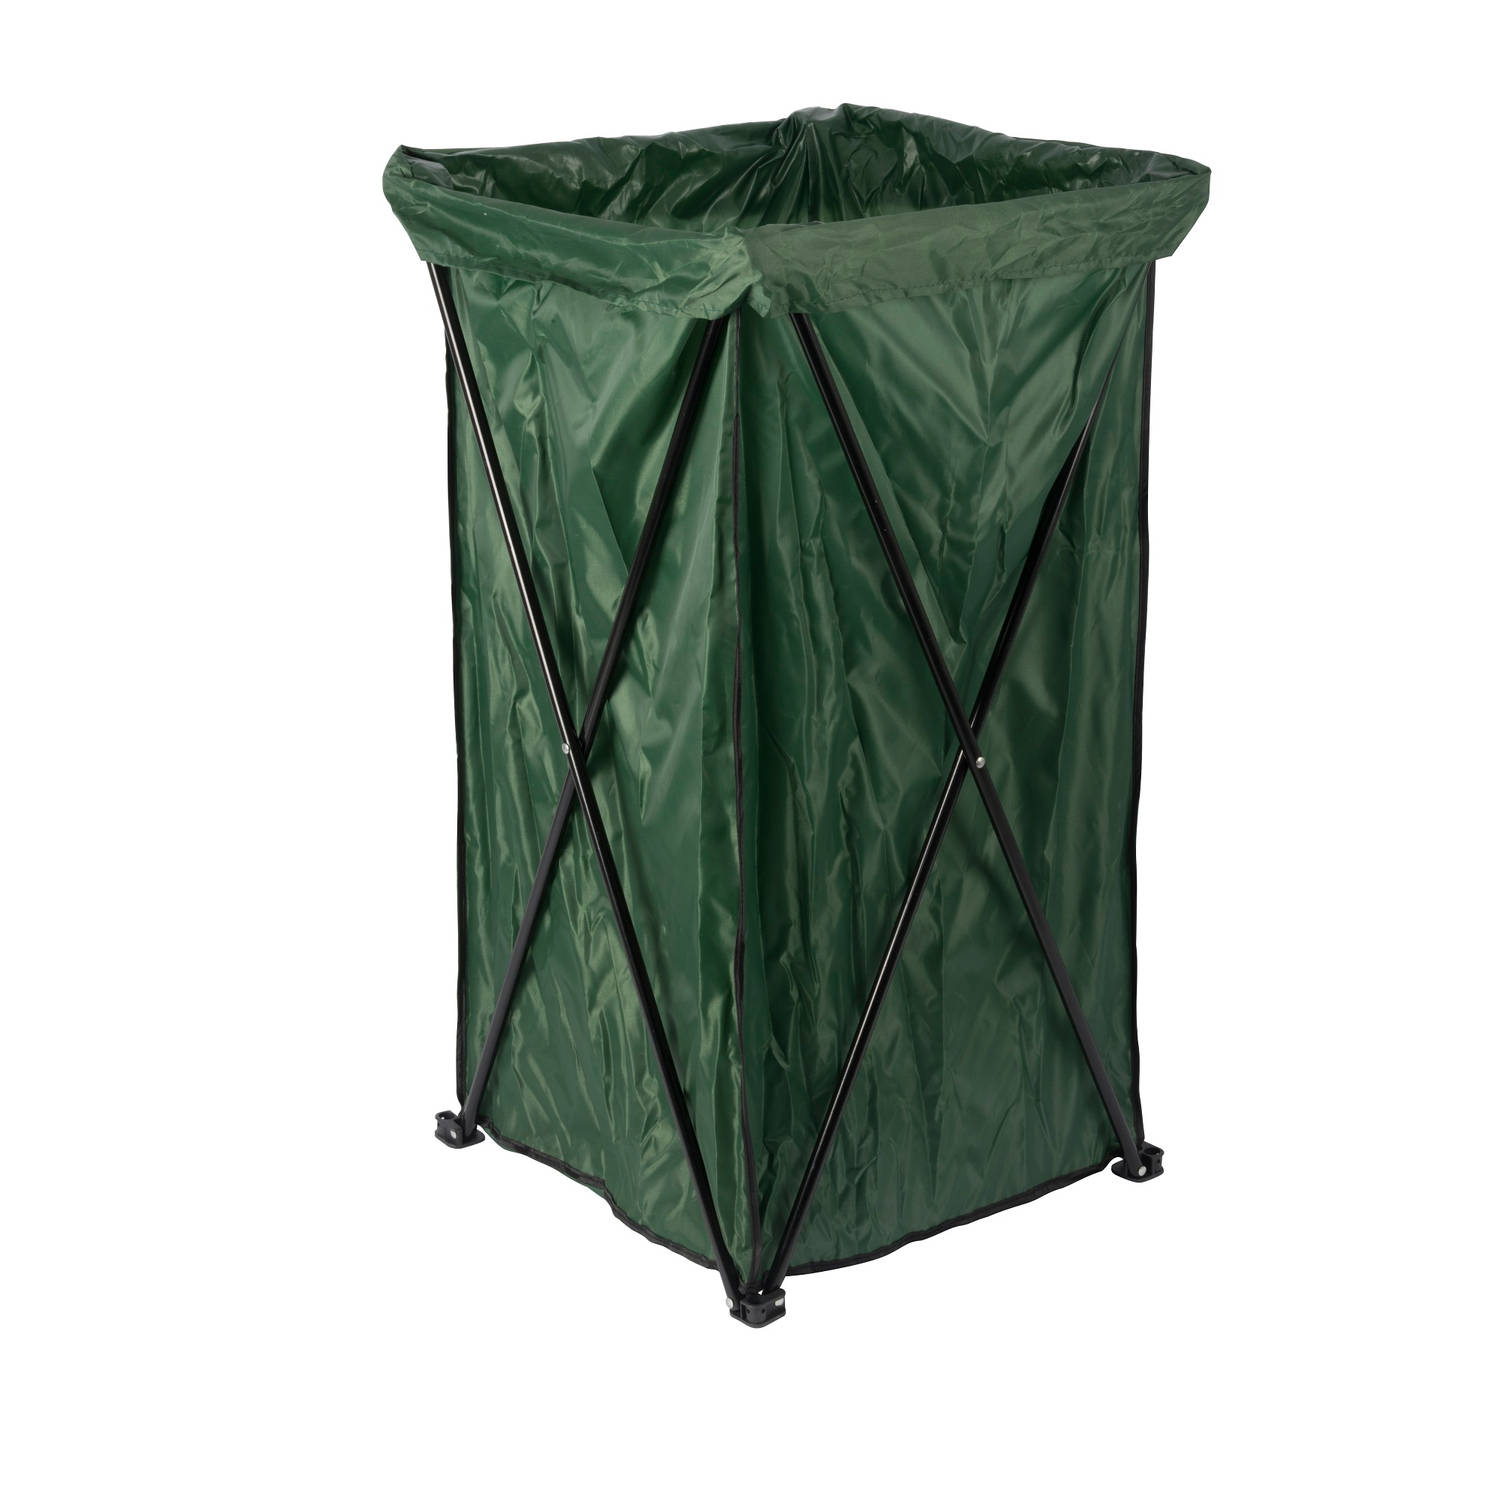 Lifetime Garden opvouwbare tuinafval container